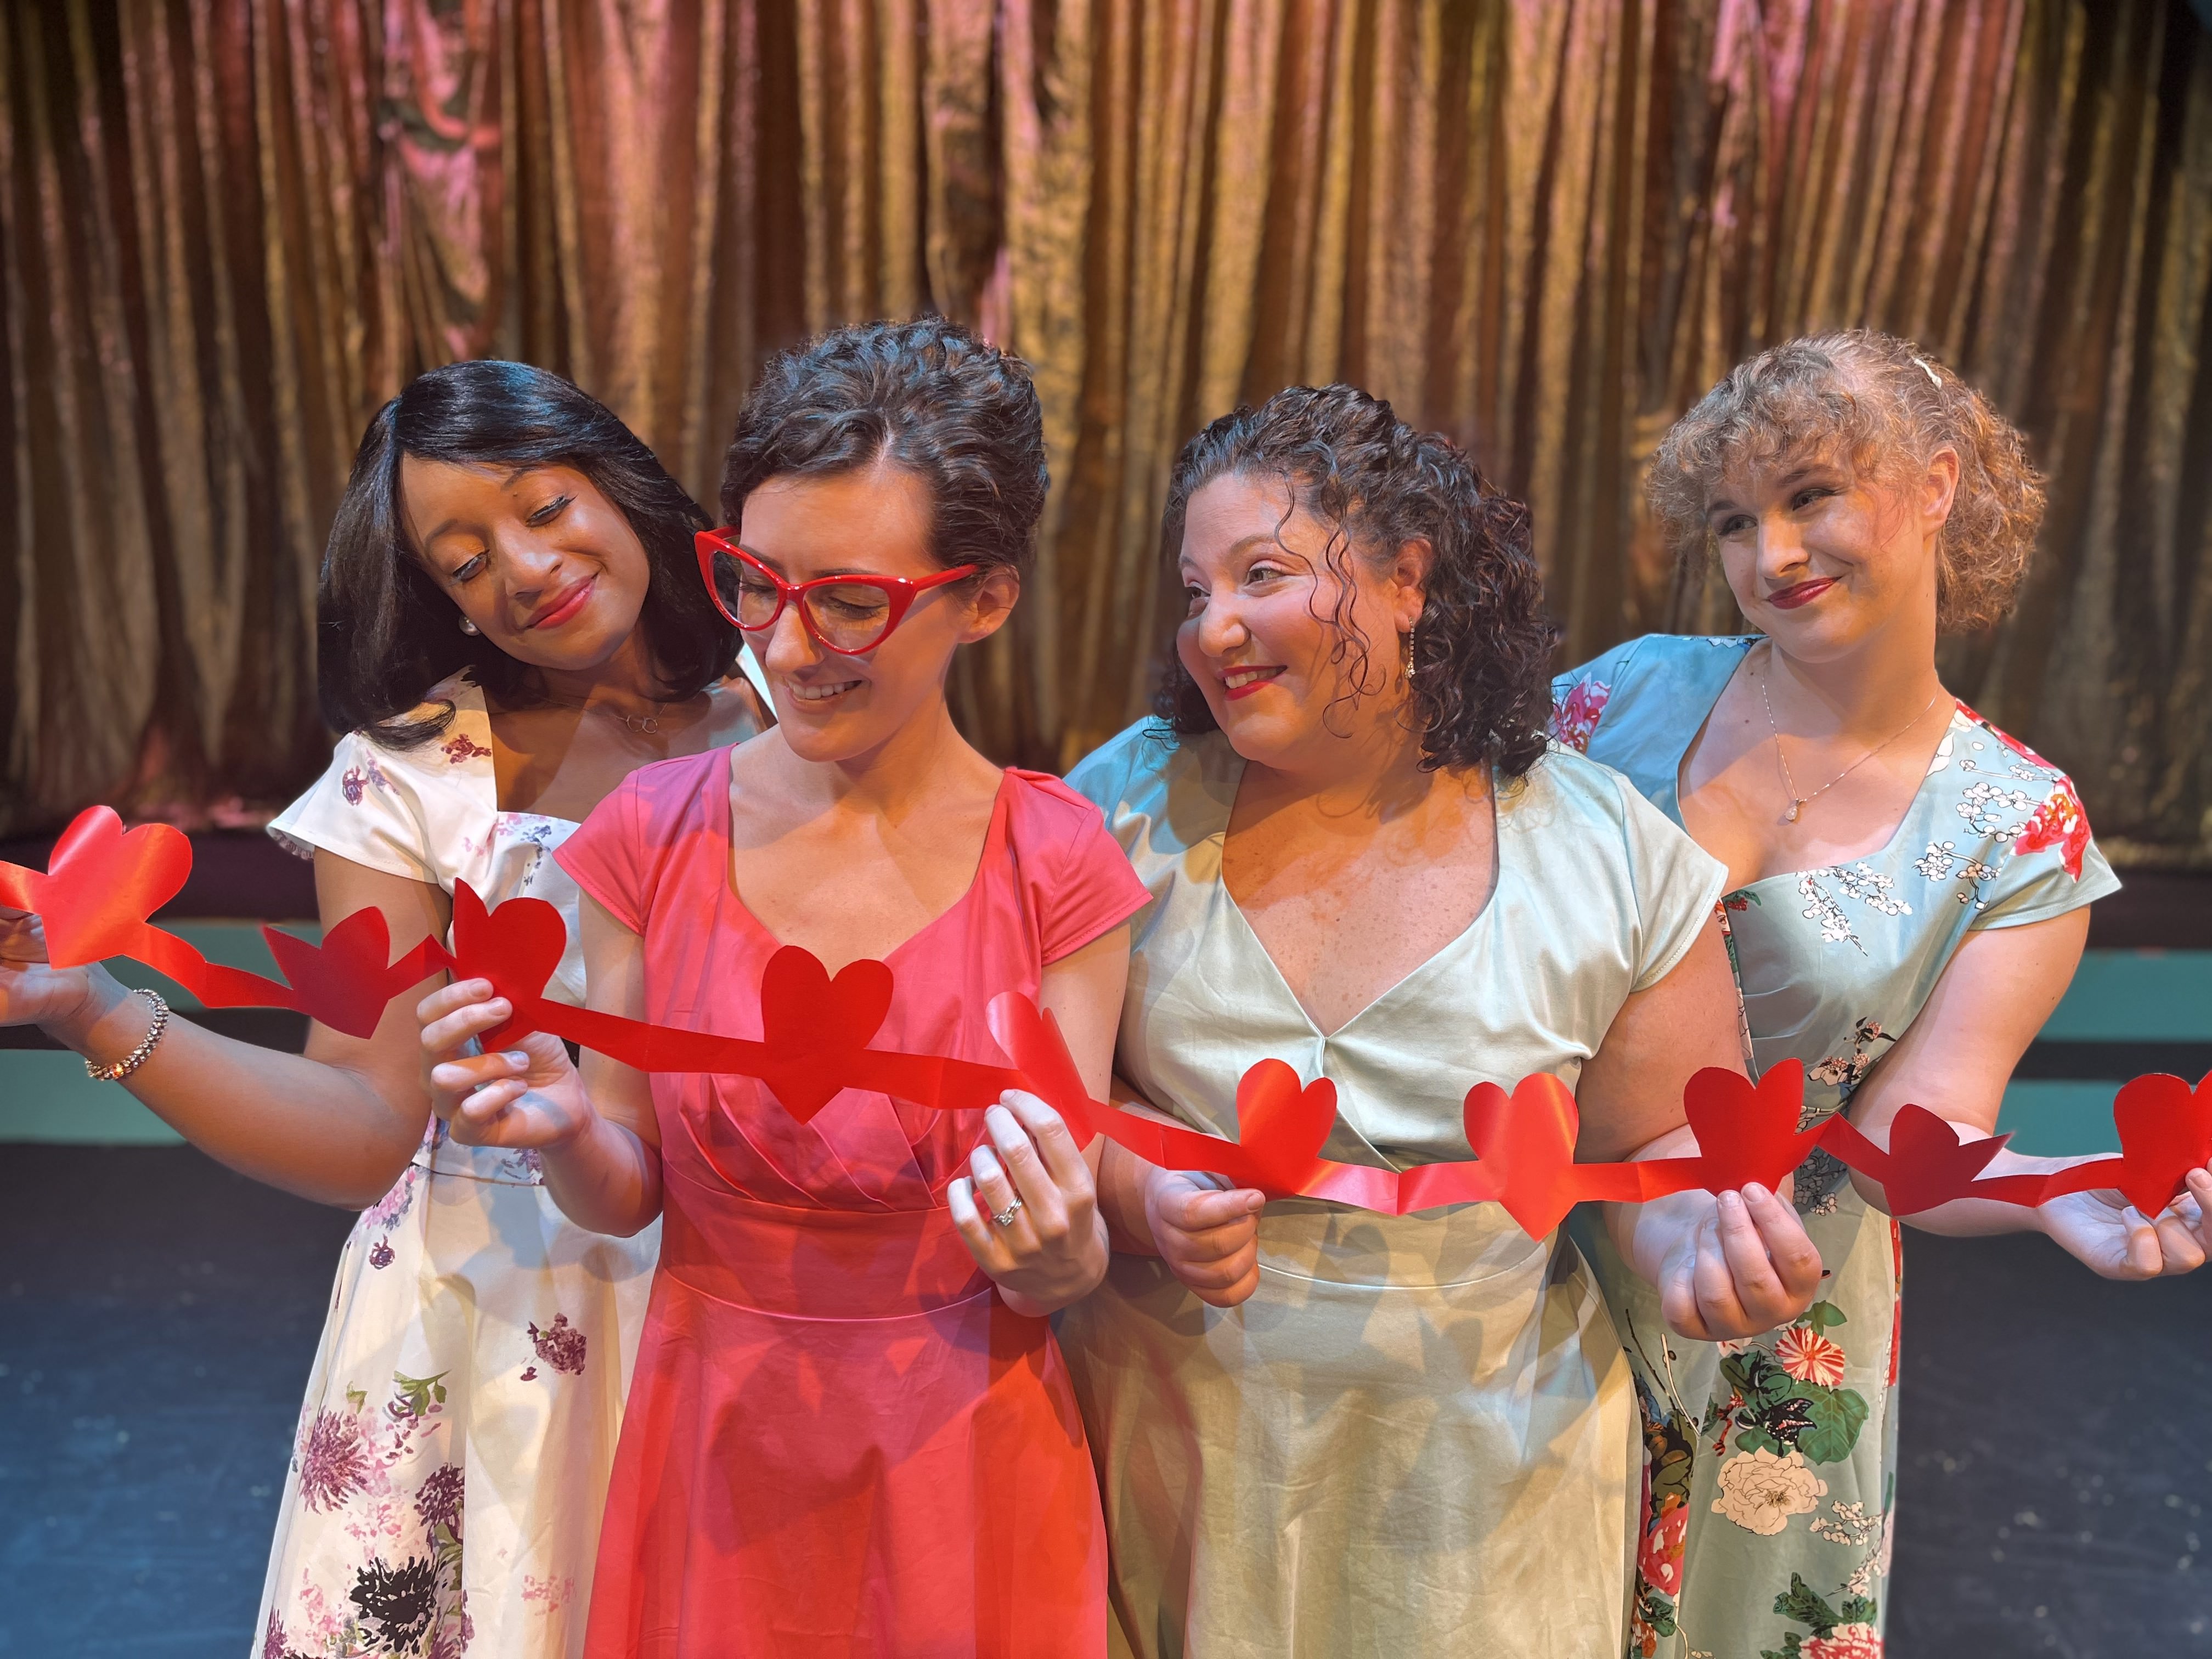 The cast of THE MARVELOUS WONDERETTES, from left to right: Natasha Truitt (Cindy Lou), Kristen Swenson (Missy), Maria Panvini (Betty Jean), and Meg Bryan (Suzy)